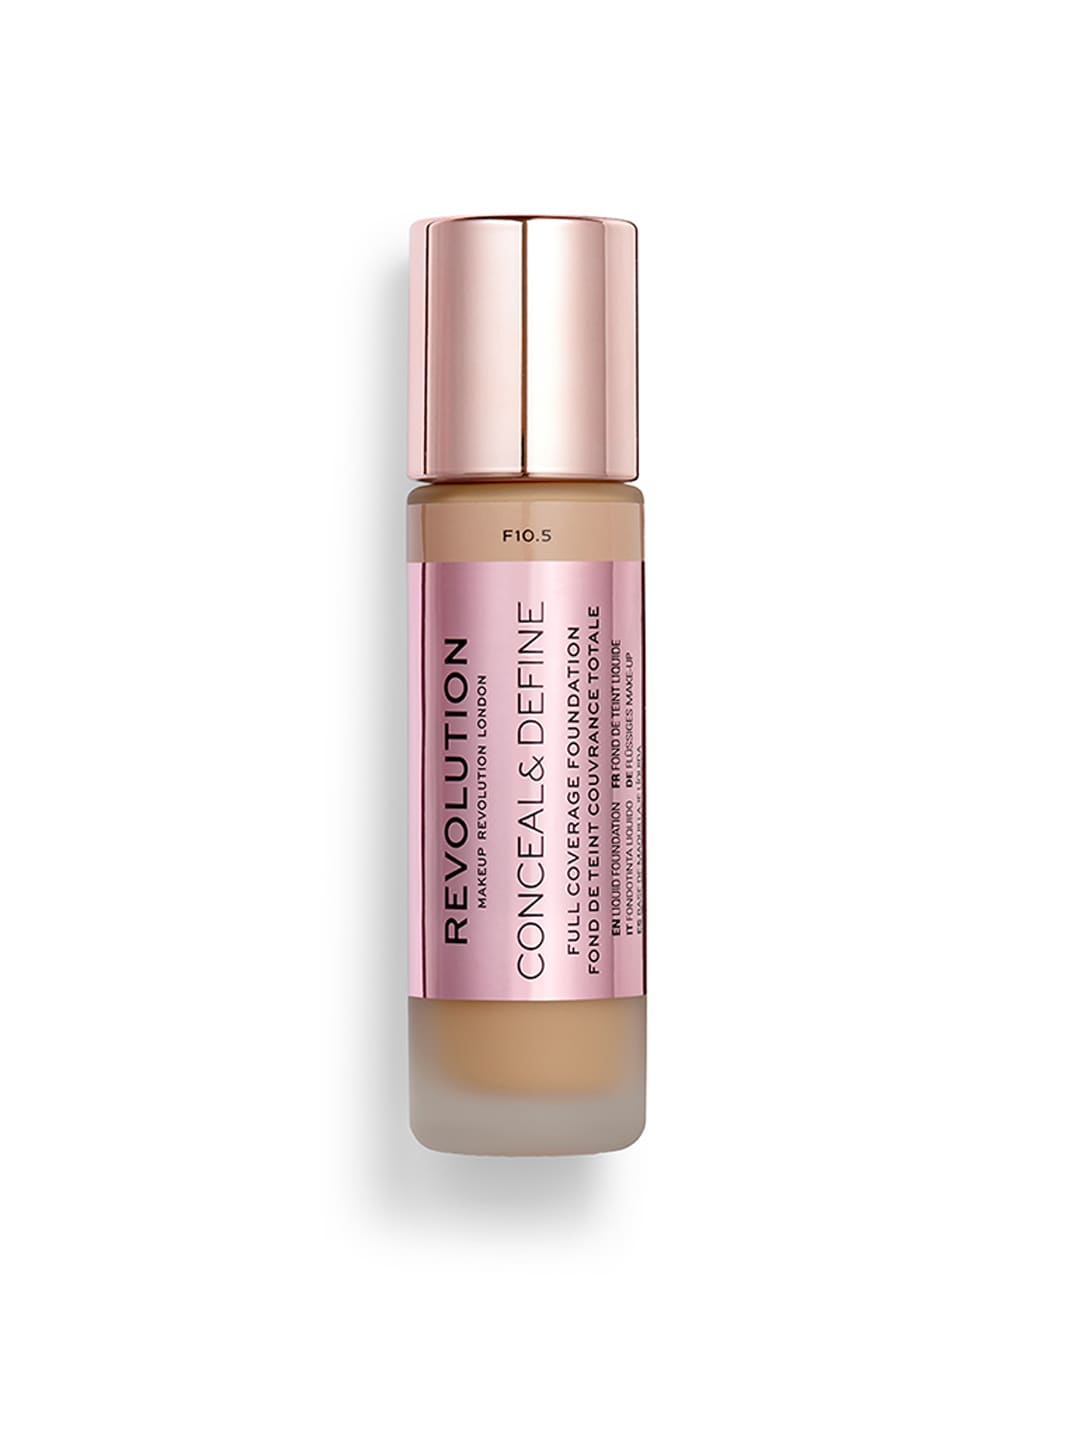 Makeup Revolution London Conceal & Define Full Coverage Foundation - F10.5 23 ml Price in India